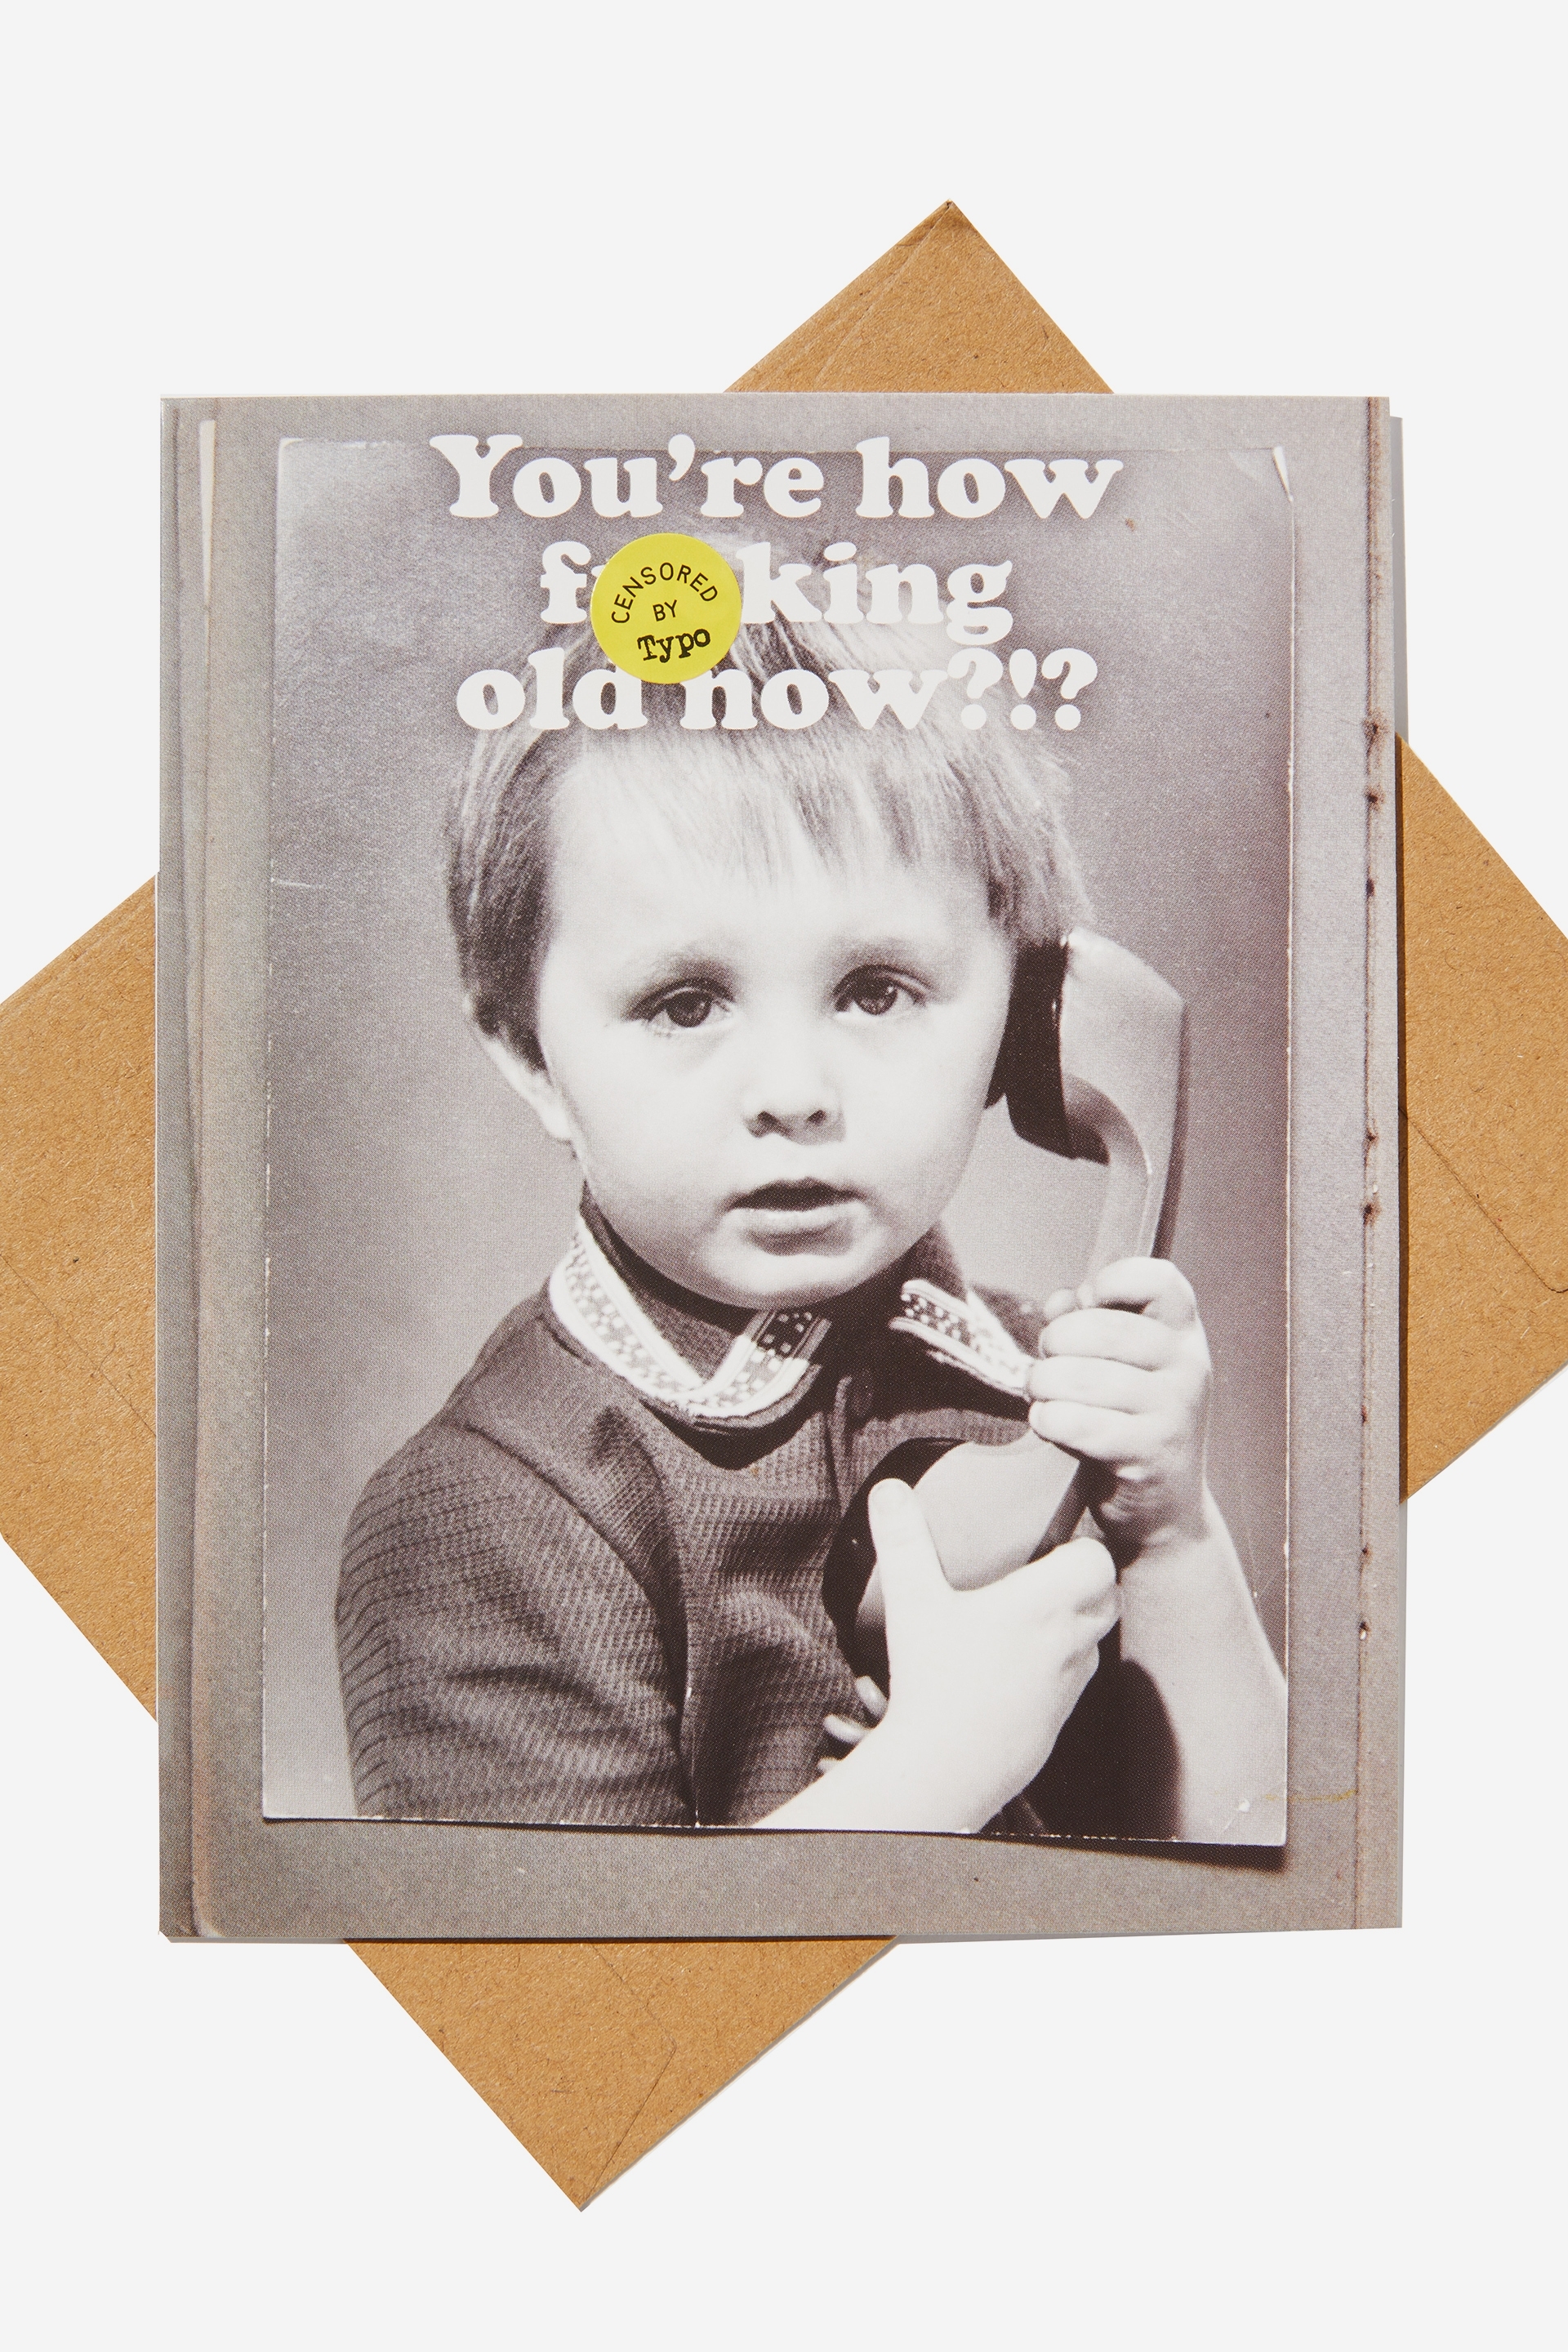 Typo - Funny Birthday Card - Photographic you re how f*cking old?